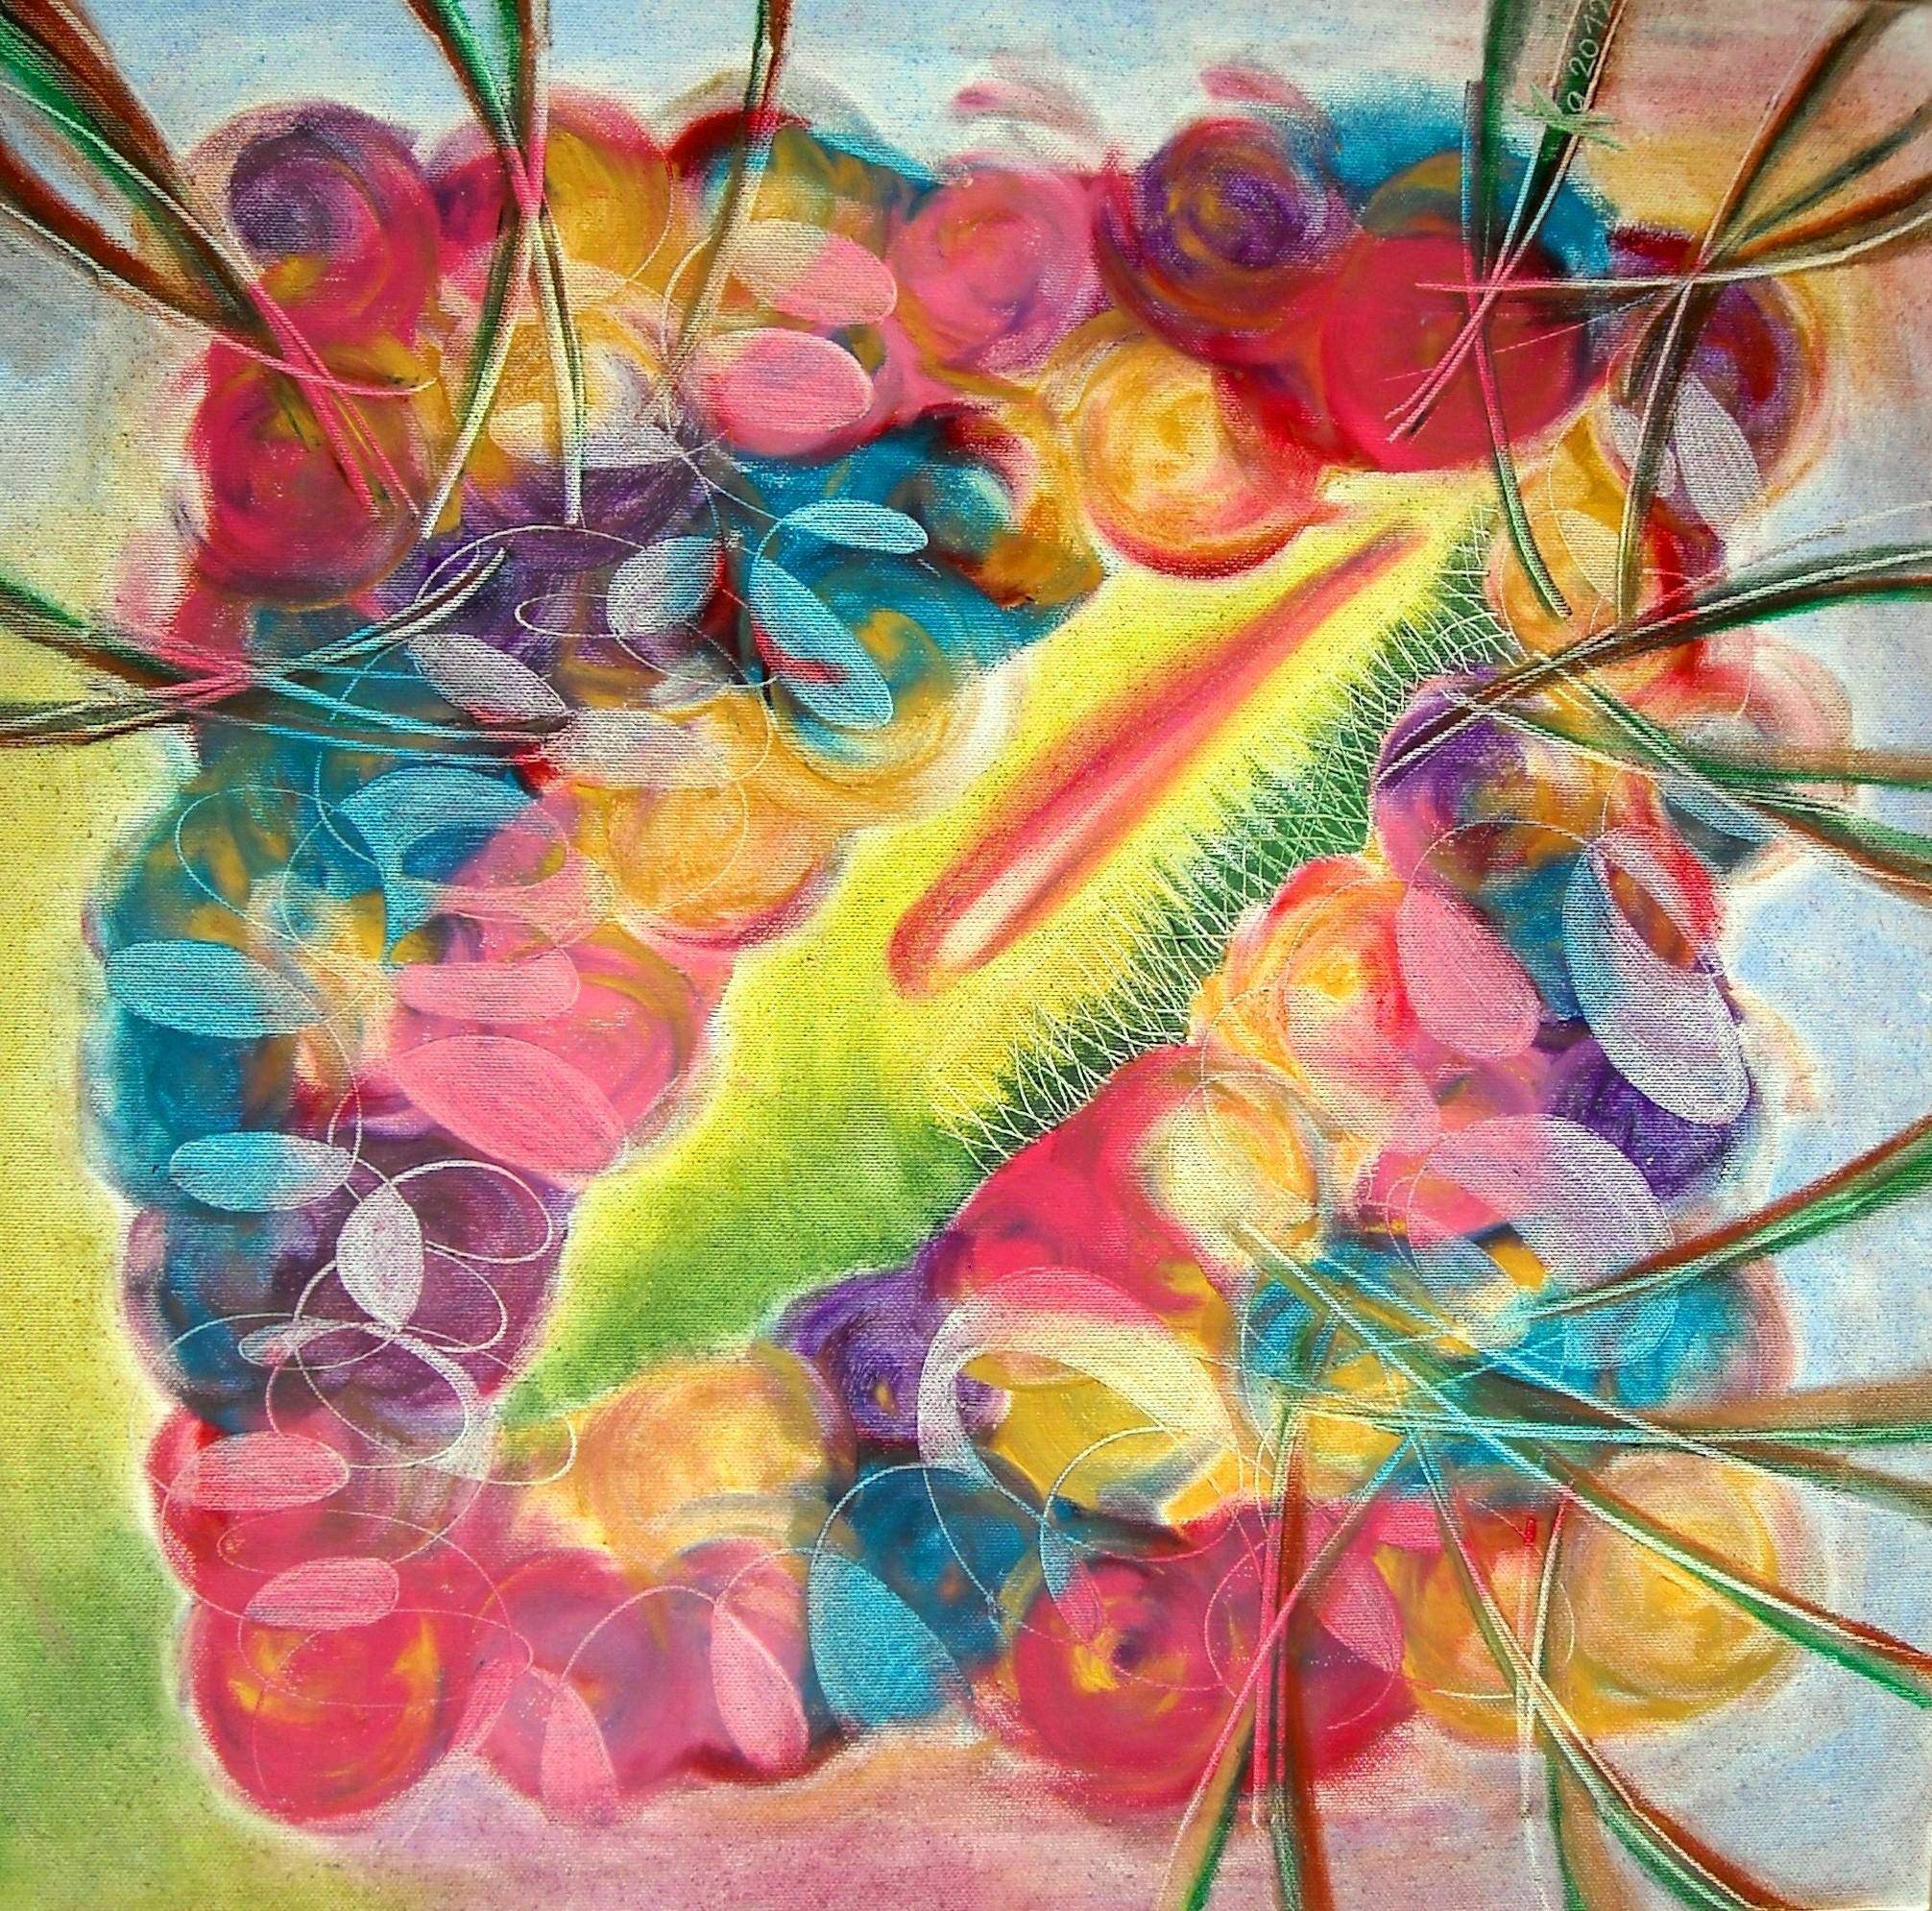 THE MISTERY INSIDE FLOWERS - oil pastels on canvas 2012, 50 x 50 cm